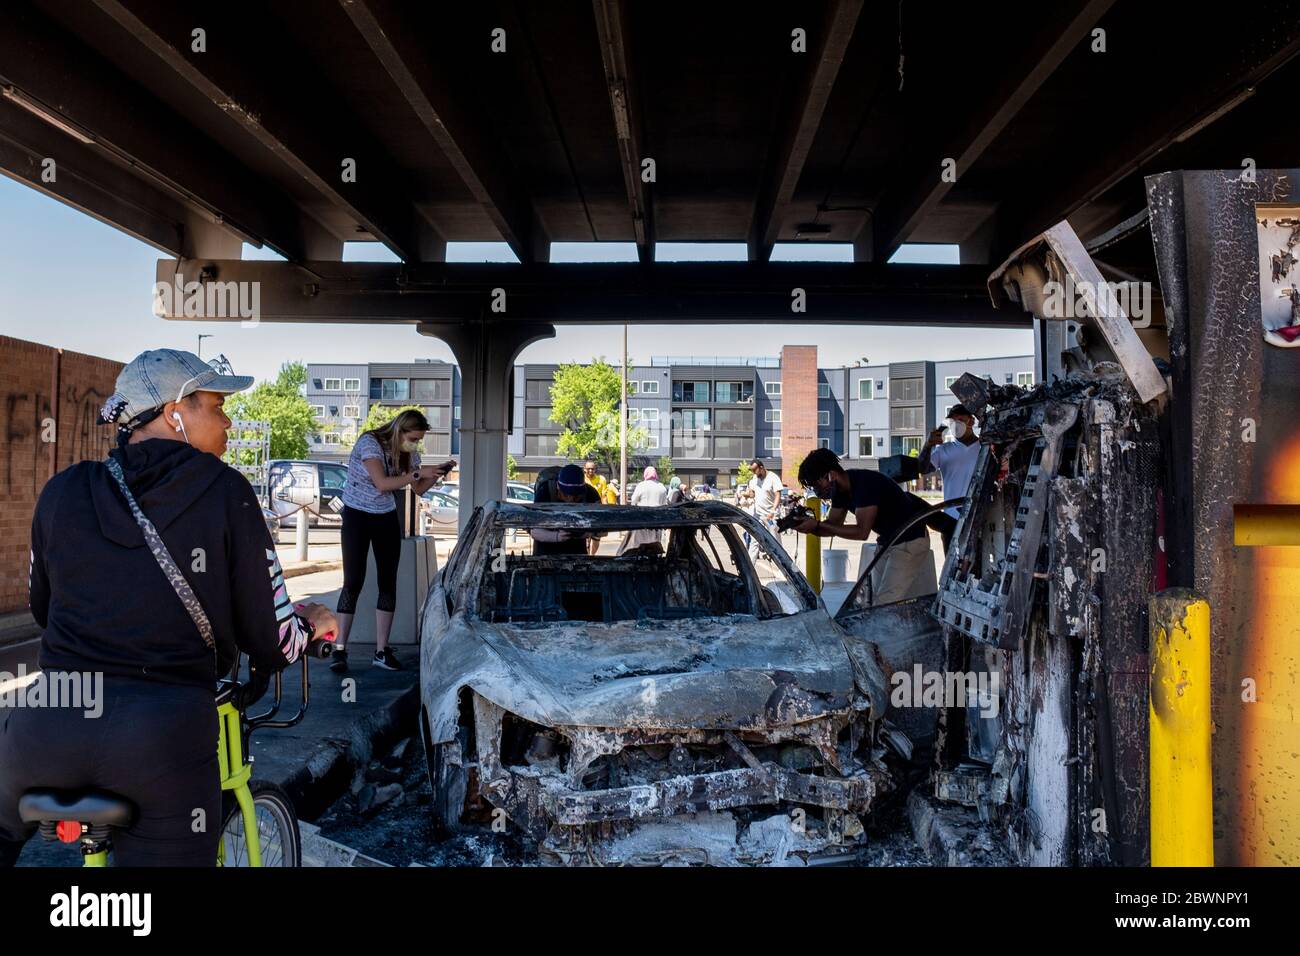 Aftermath of the riots the Wells Fargo Bank that was looted and set on fire near the Minneapolis 5th police precinct, Saturday, May 30, 2020 Stock Photo